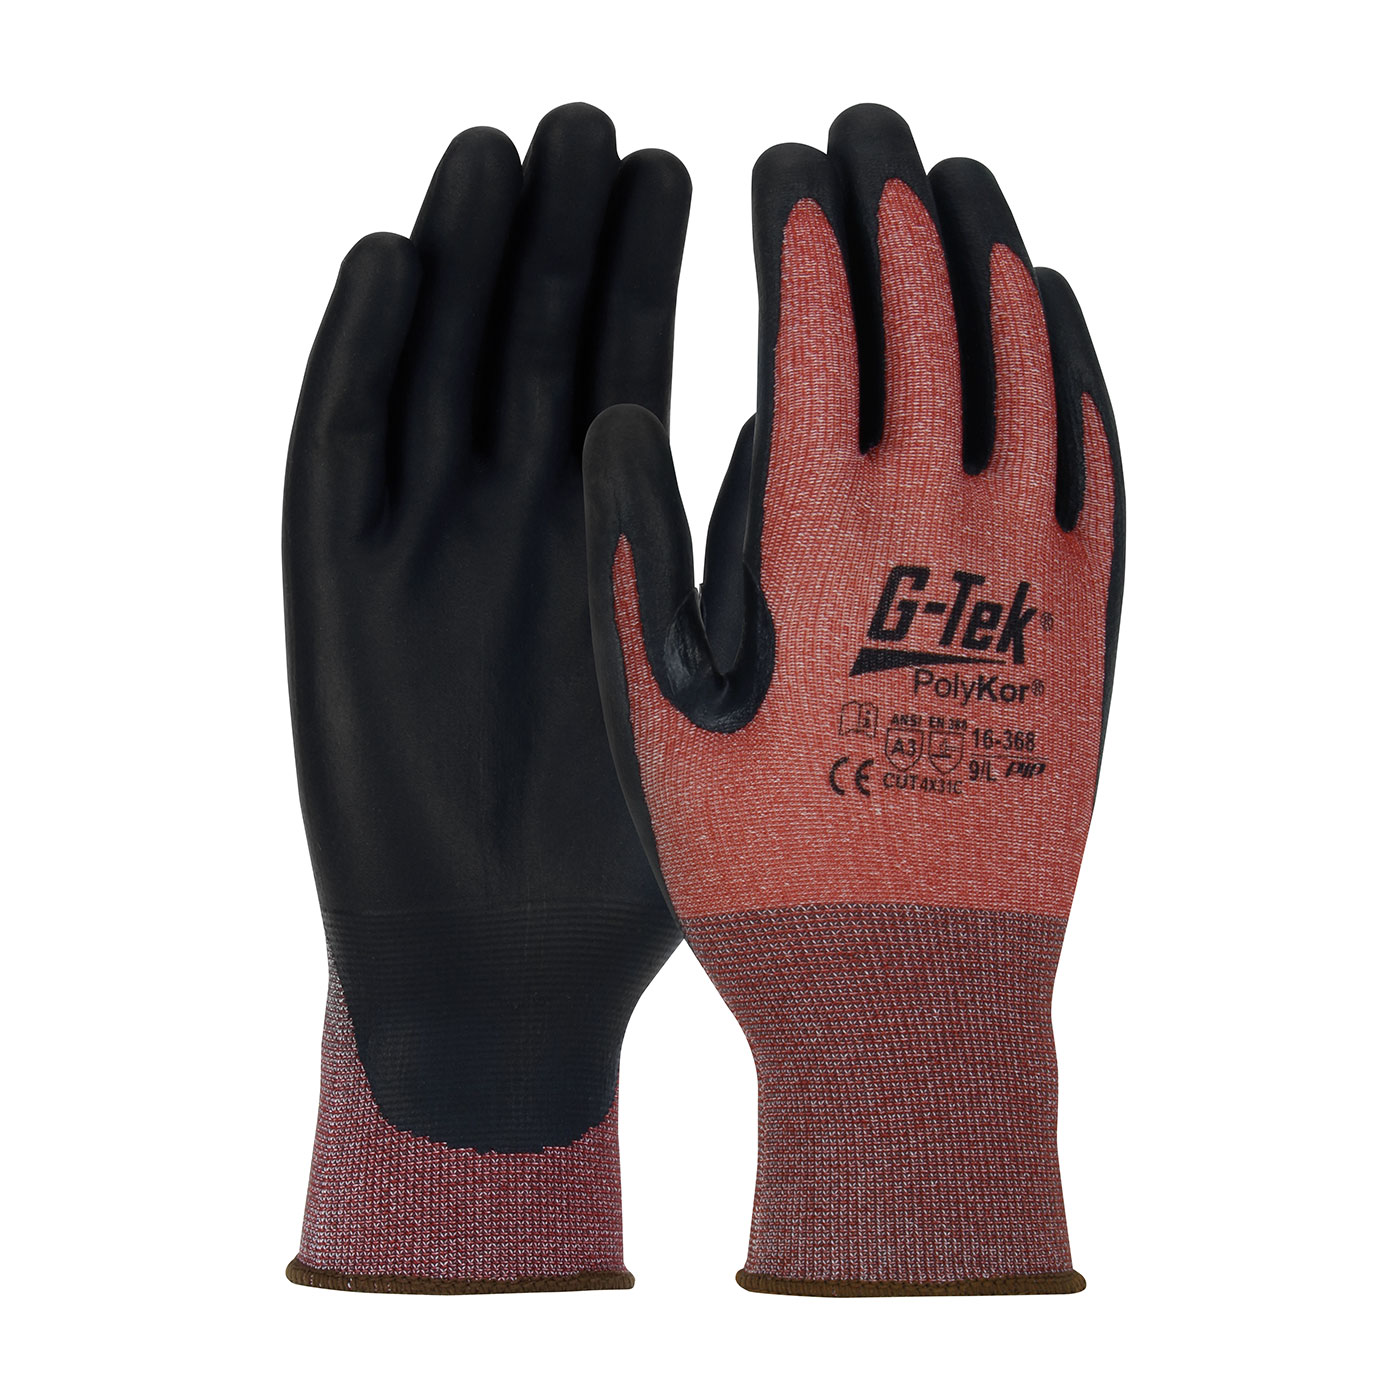 #16-368 PIP® G-Tek® PolyKor® X7™ Seamless Knit PolyKor® X7™ Blended Glove with NeoFoam® Coated Palm & Fingers - Touchscreen Compatible 